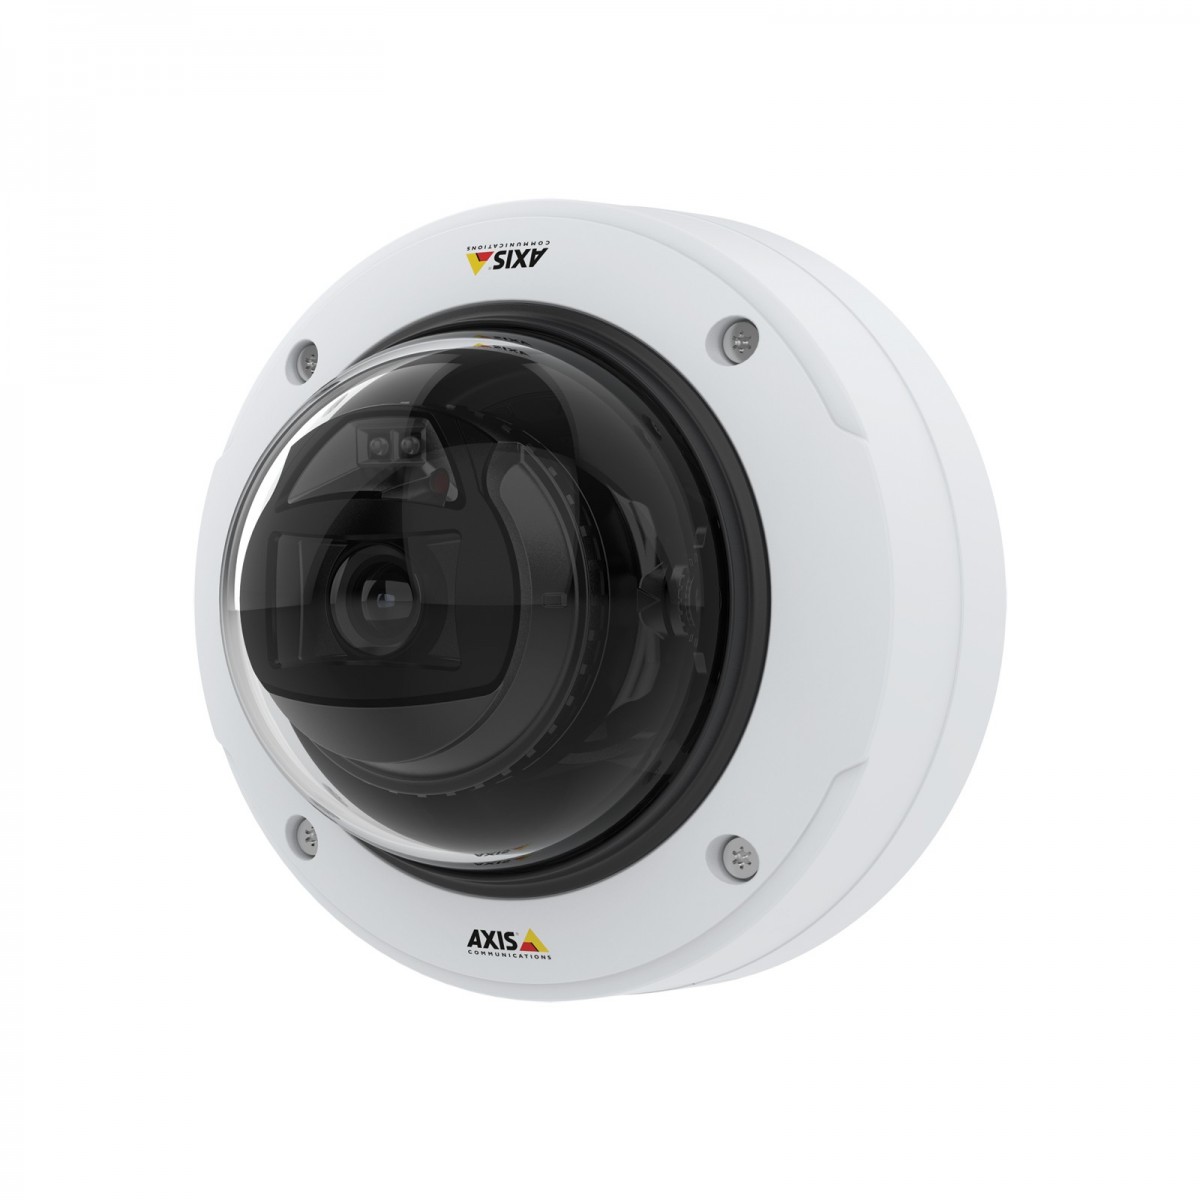 Axis P3255-LVE - IP security camera - Outdoor - Wired - Dome - Ceiling-wall - Black - White